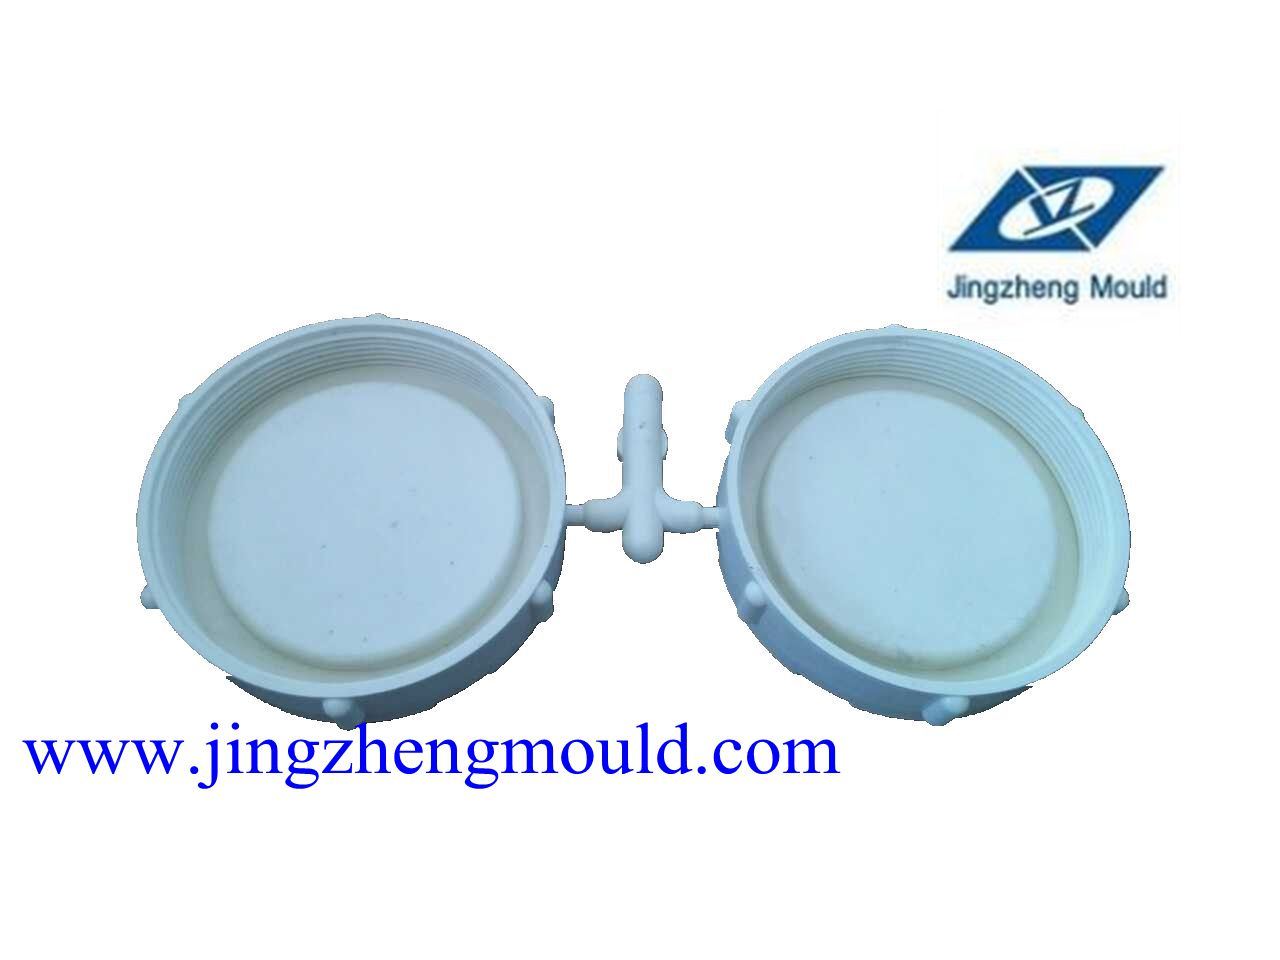 PVC Pipe and Fittings Cap Mold/Molding